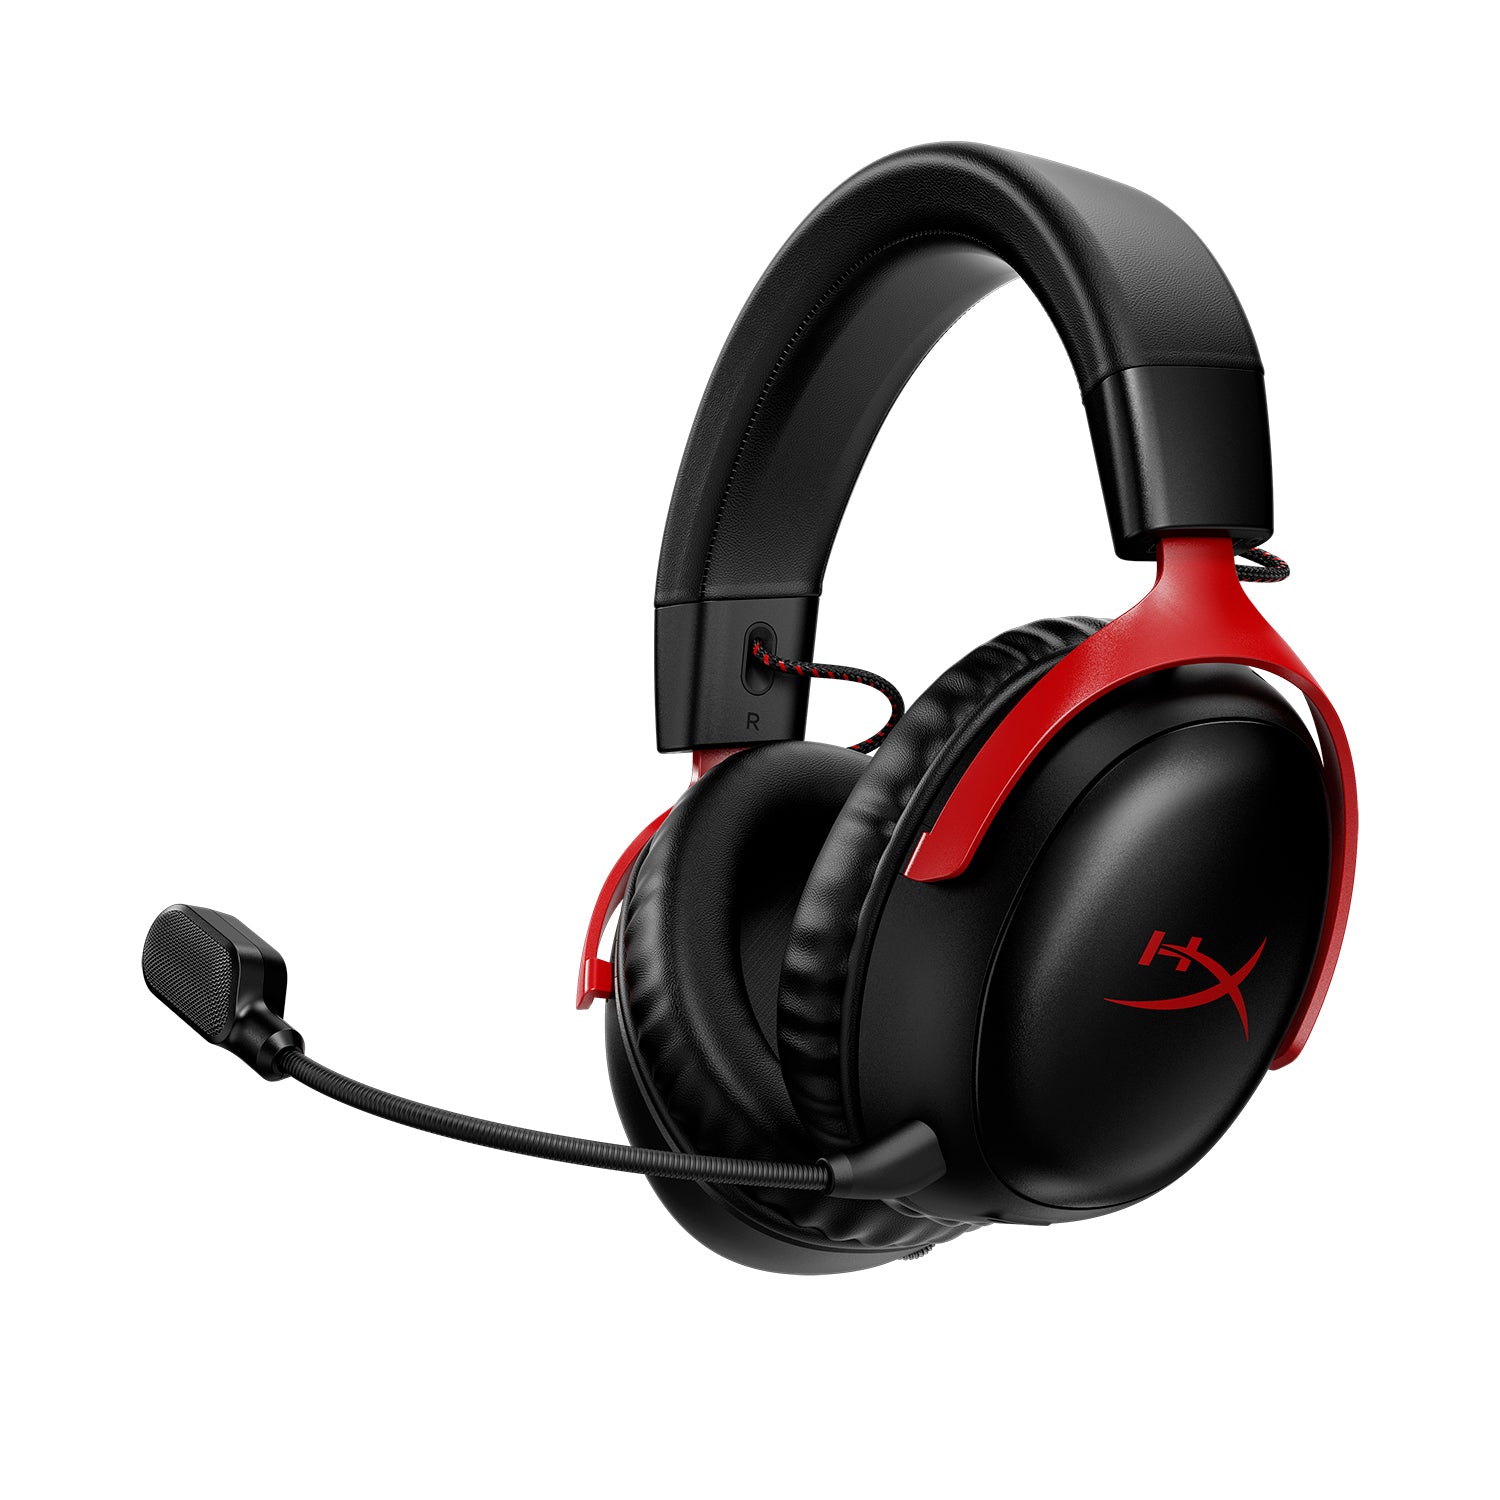 HyperX Cloud III Wireless Black-Red Gaming Headset - main angled view pointing to the left side